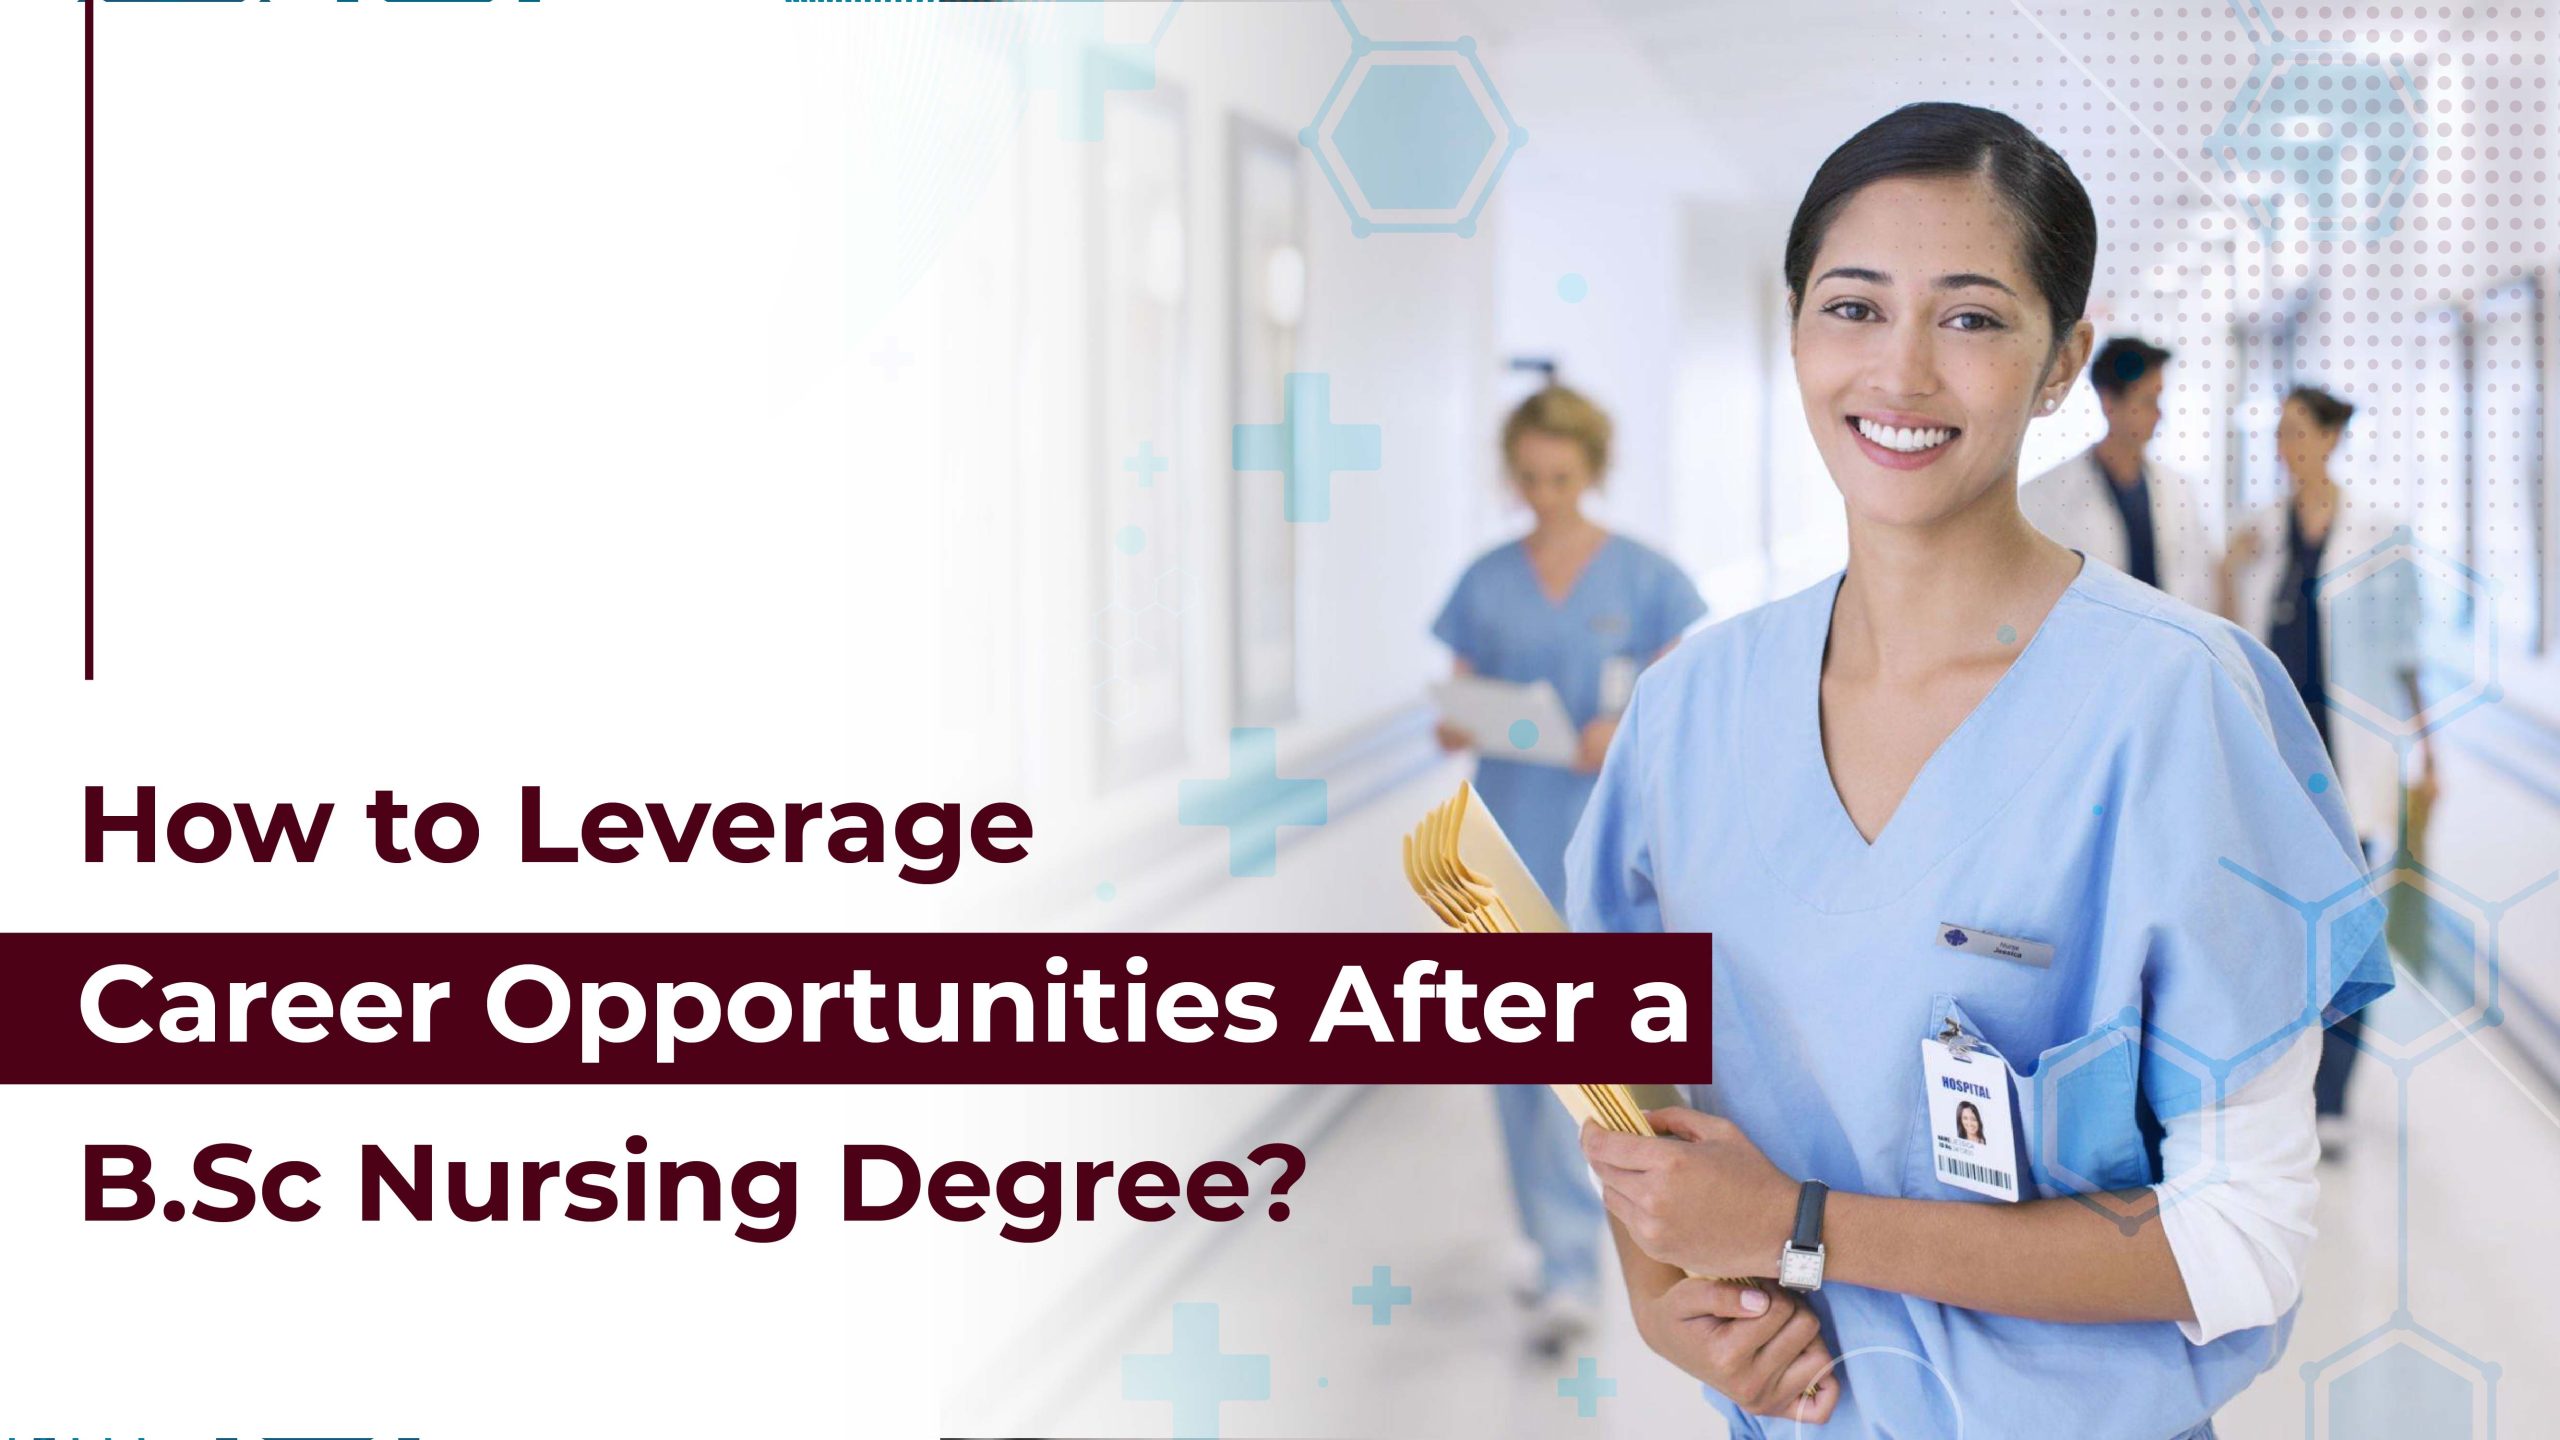 How to Leverage Career Opportunities After a B.Sc Nursing Degree?